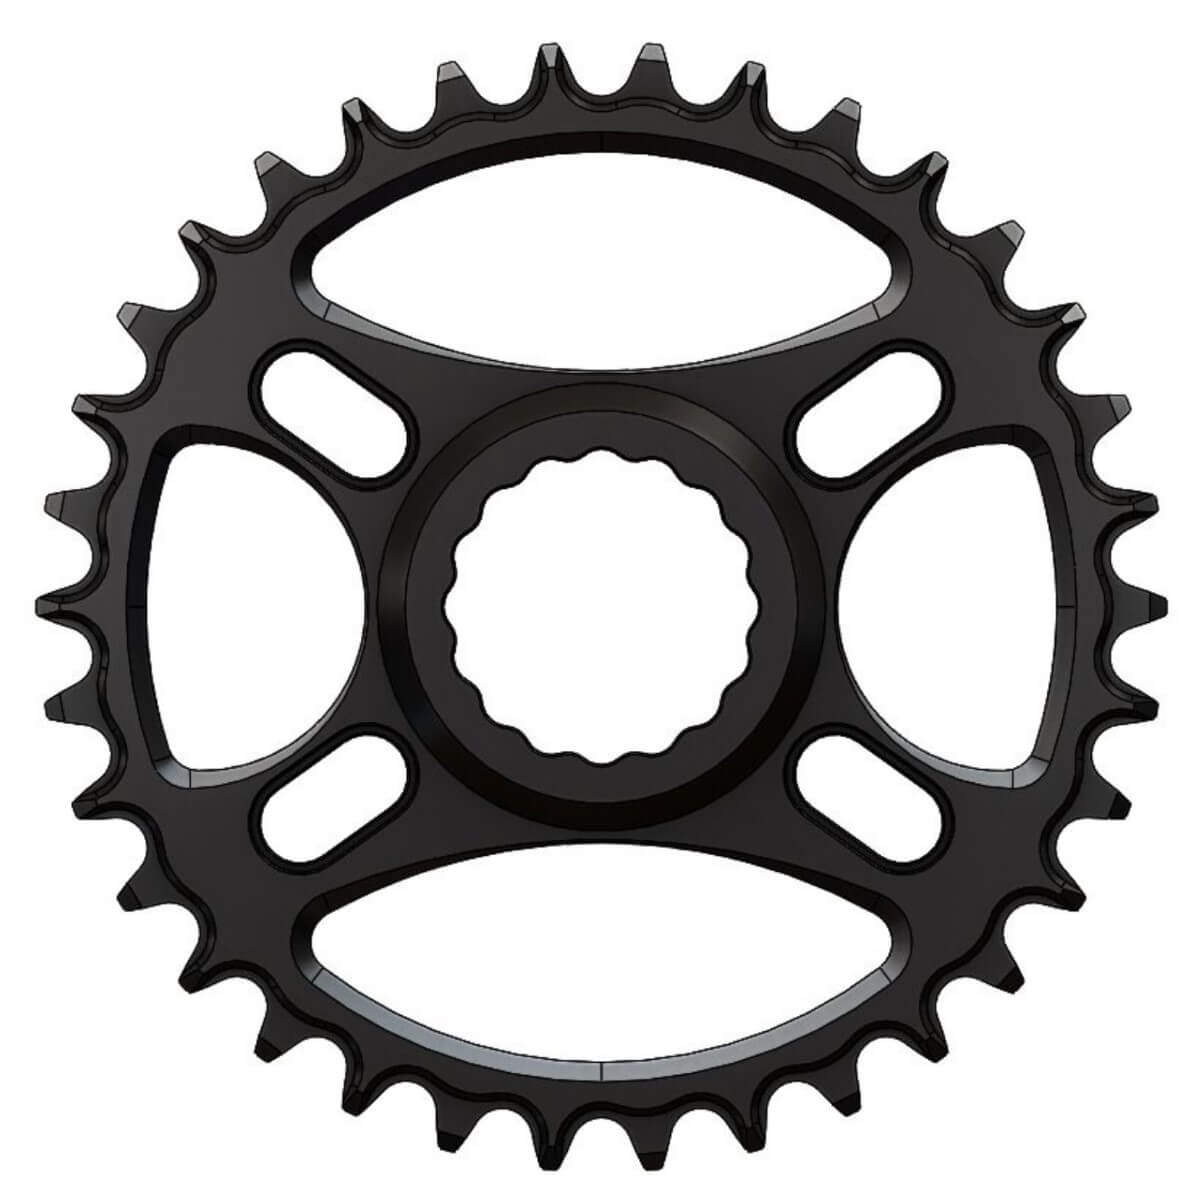 C42 Chainring Narrow Wide 30T for Race Face direct mount.